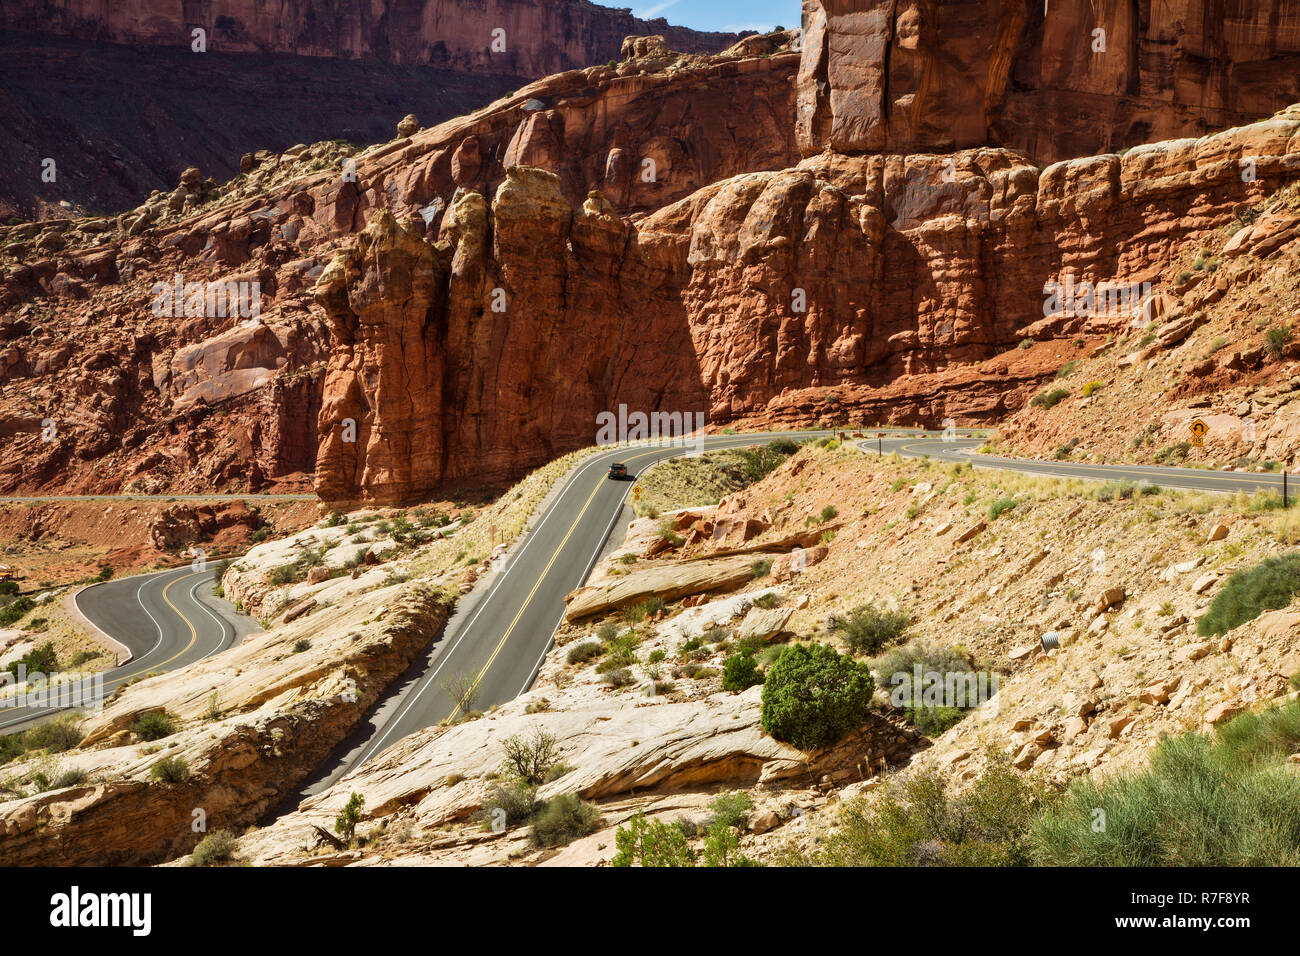 The entry drive into Arches National Park, Utah. Stock Photo